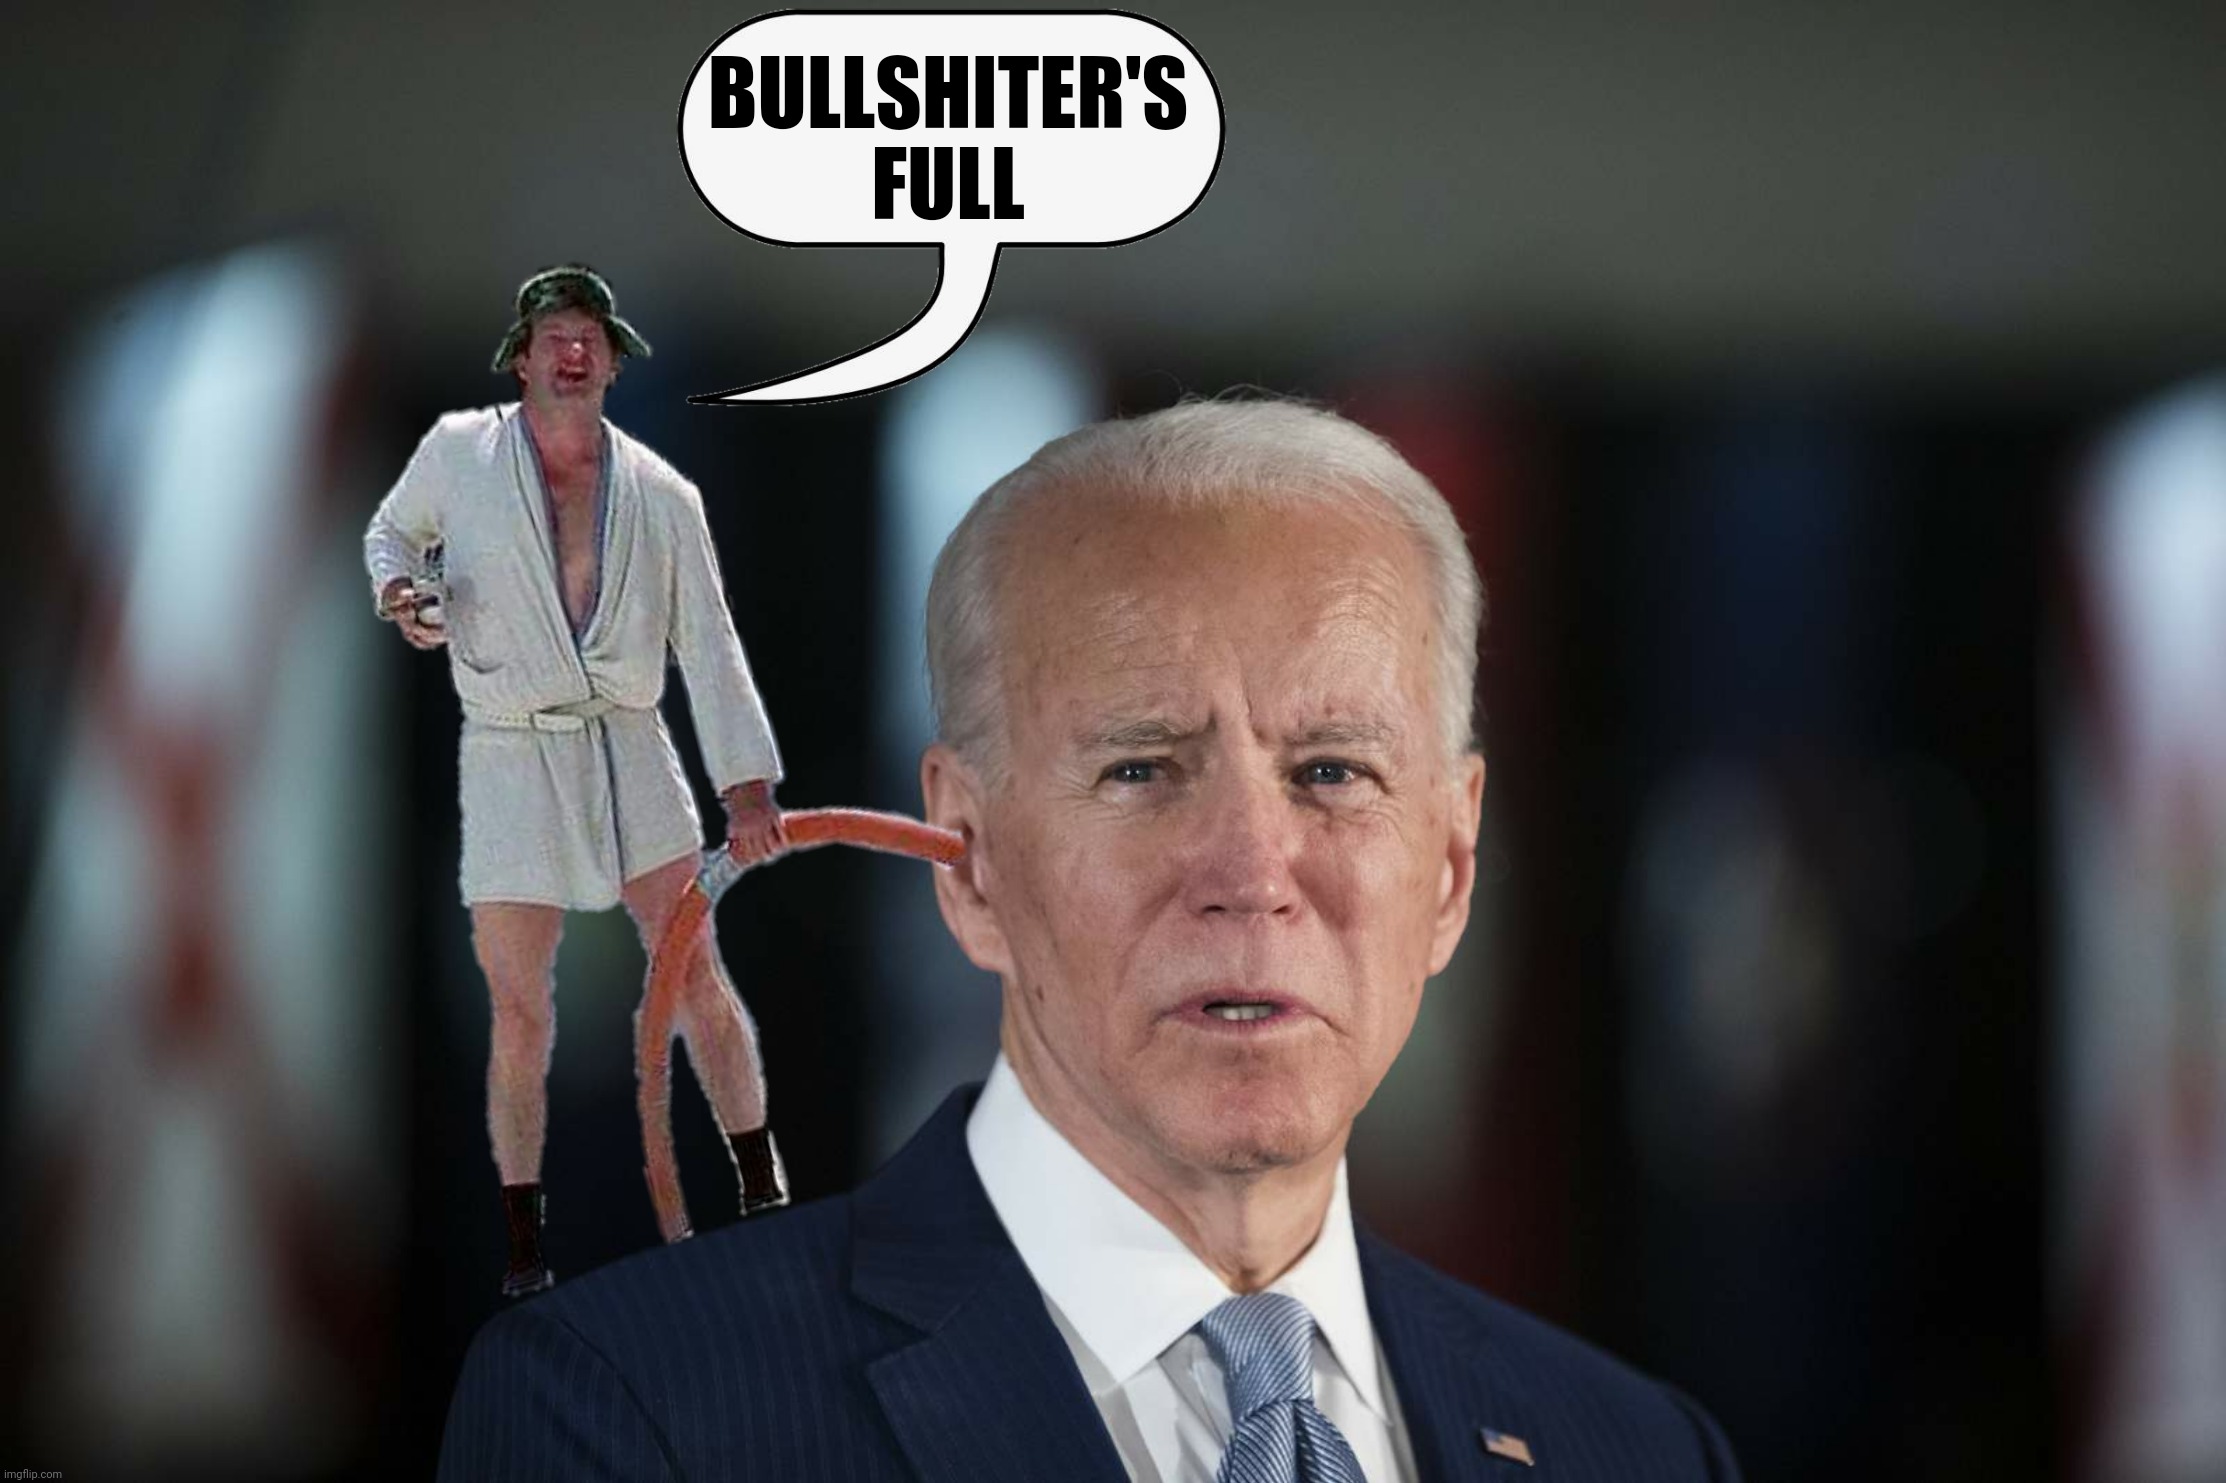 Every time Jill revved up the microwave I'd piss my pants and forget who I was for about a half an hour or so | BULLSHITER'S
FULL | image tagged in bad photoshop sunday,joe biden,cousin eddie,shitter's full | made w/ Imgflip meme maker